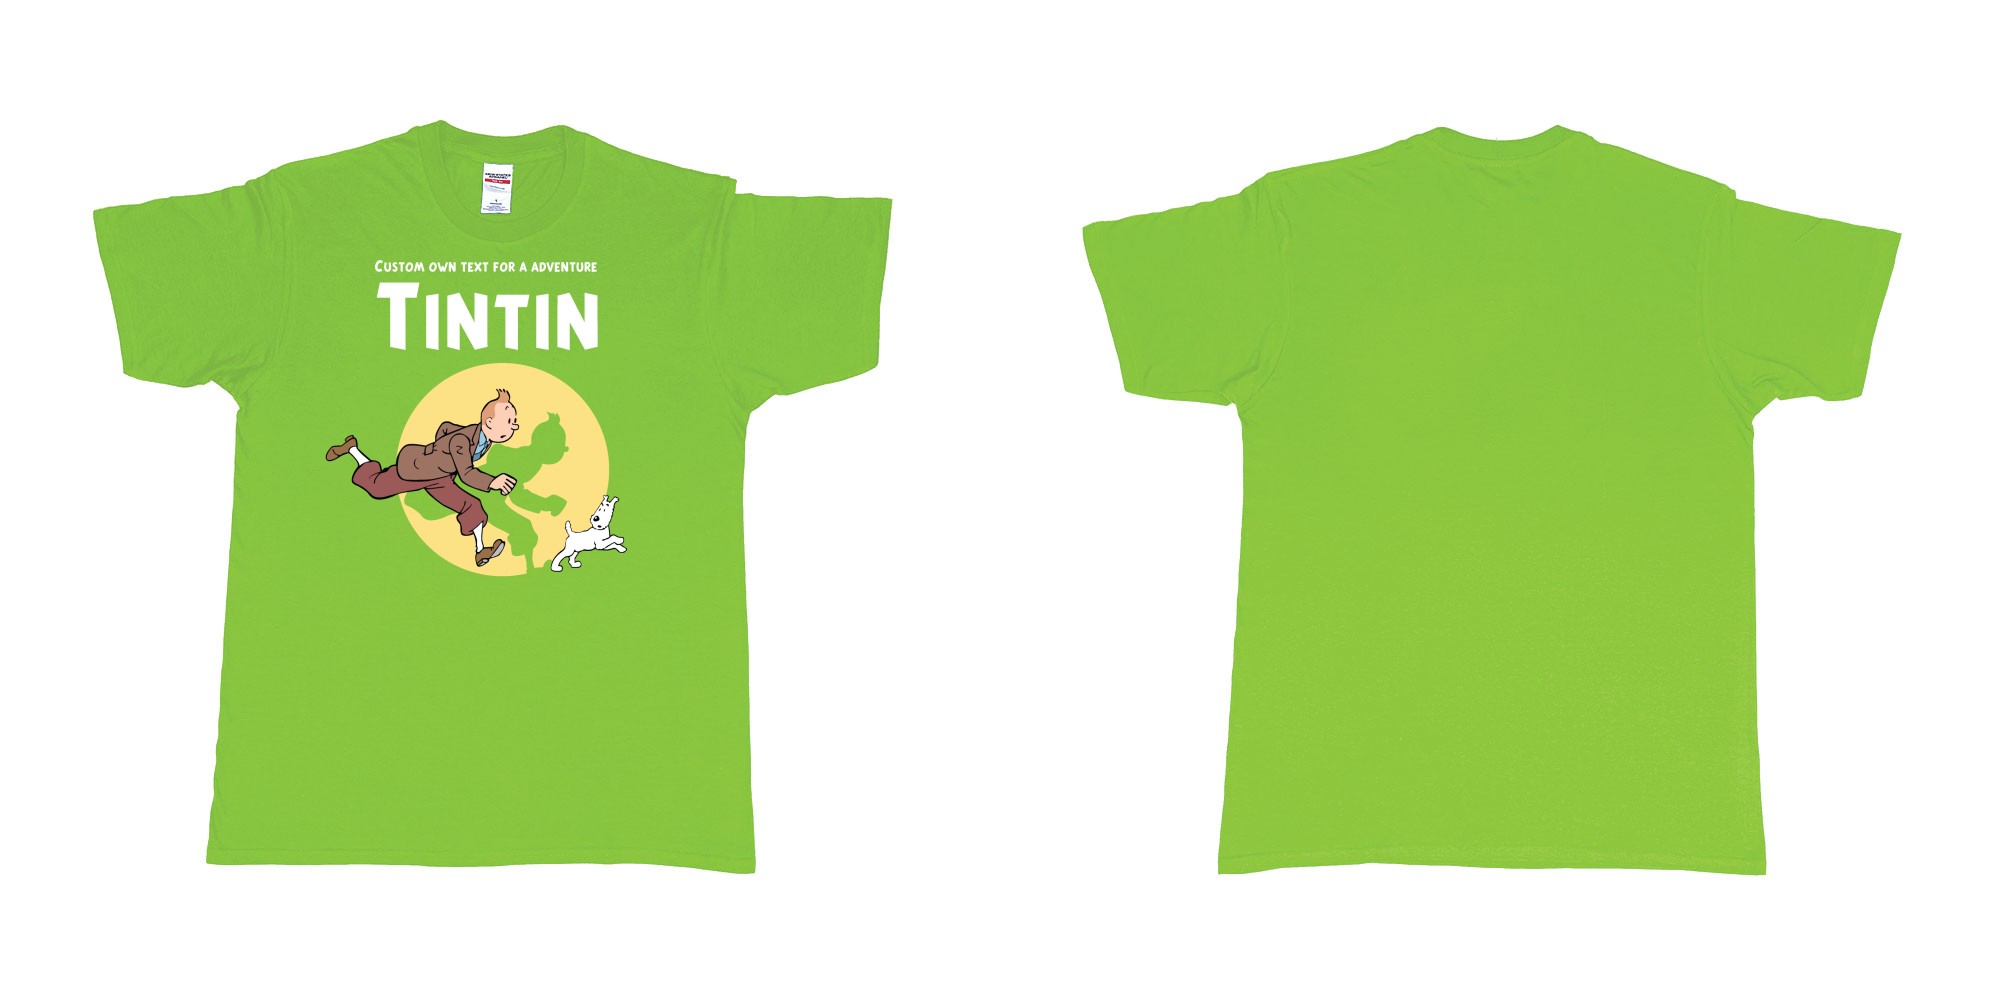 Custom tshirt design tintin custom text for adventure teeshirt printing in fabric color lime choice your own text made in Bali by The Pirate Way